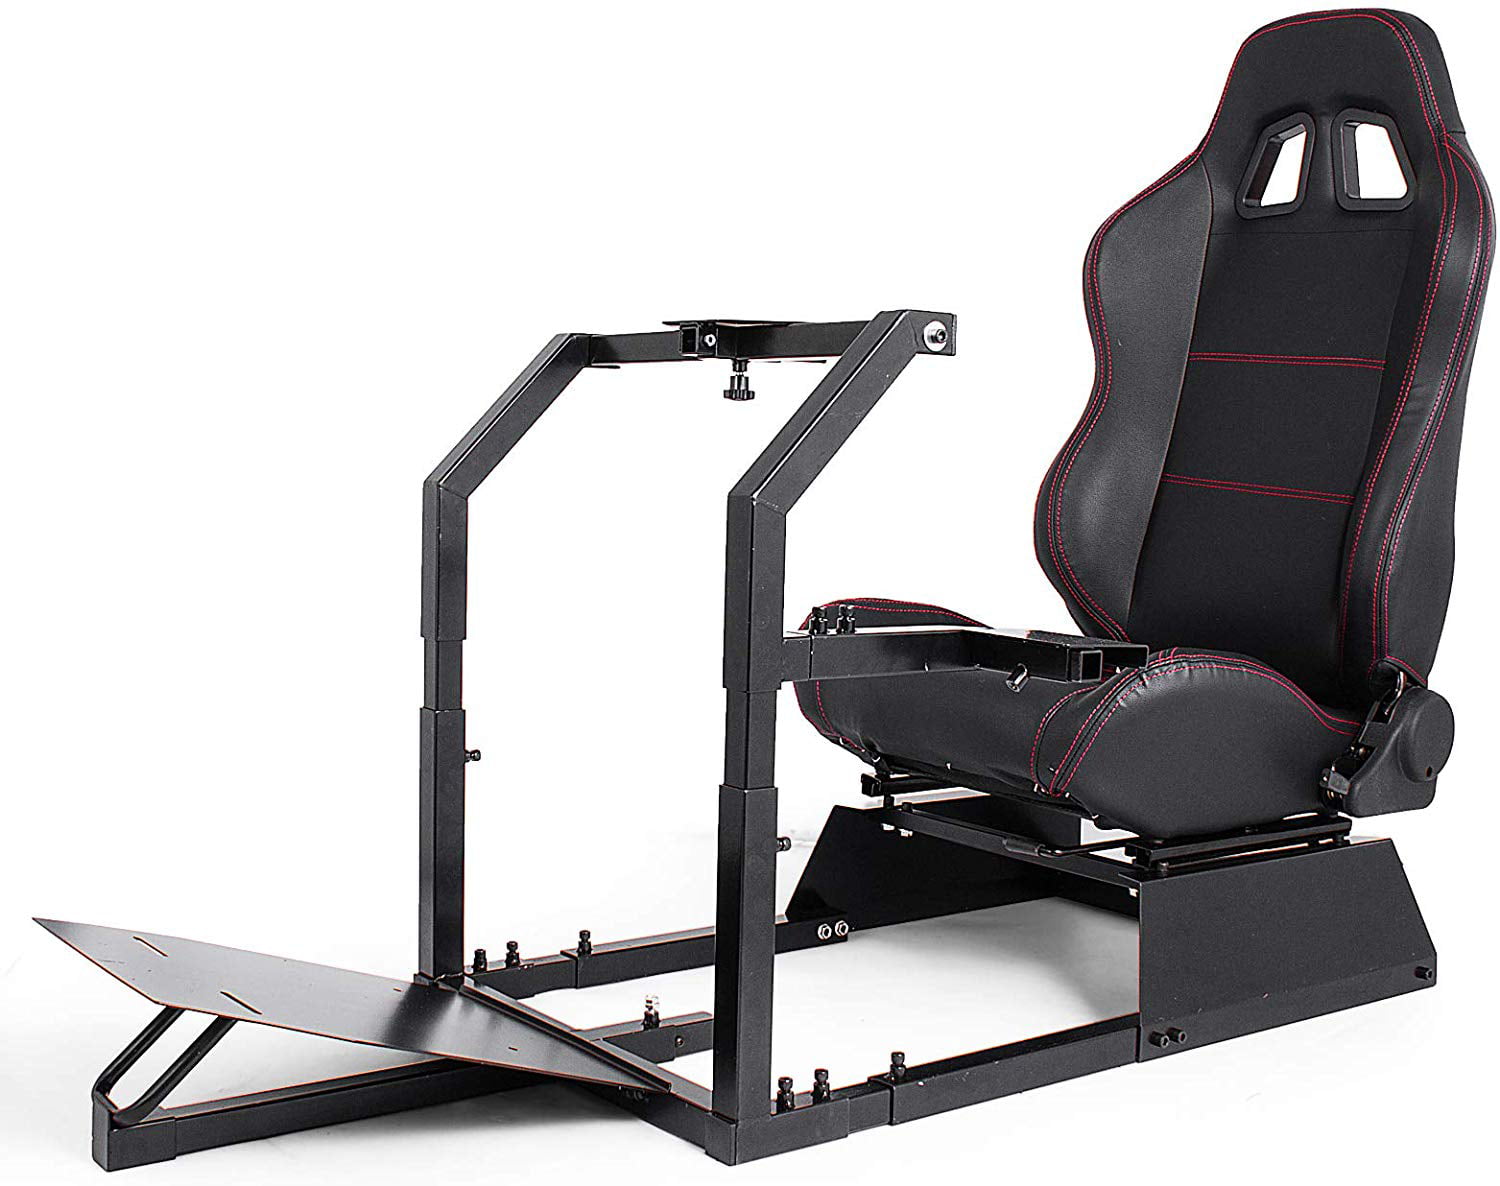 New Logitech Gaming Chair Review with Simple Decor